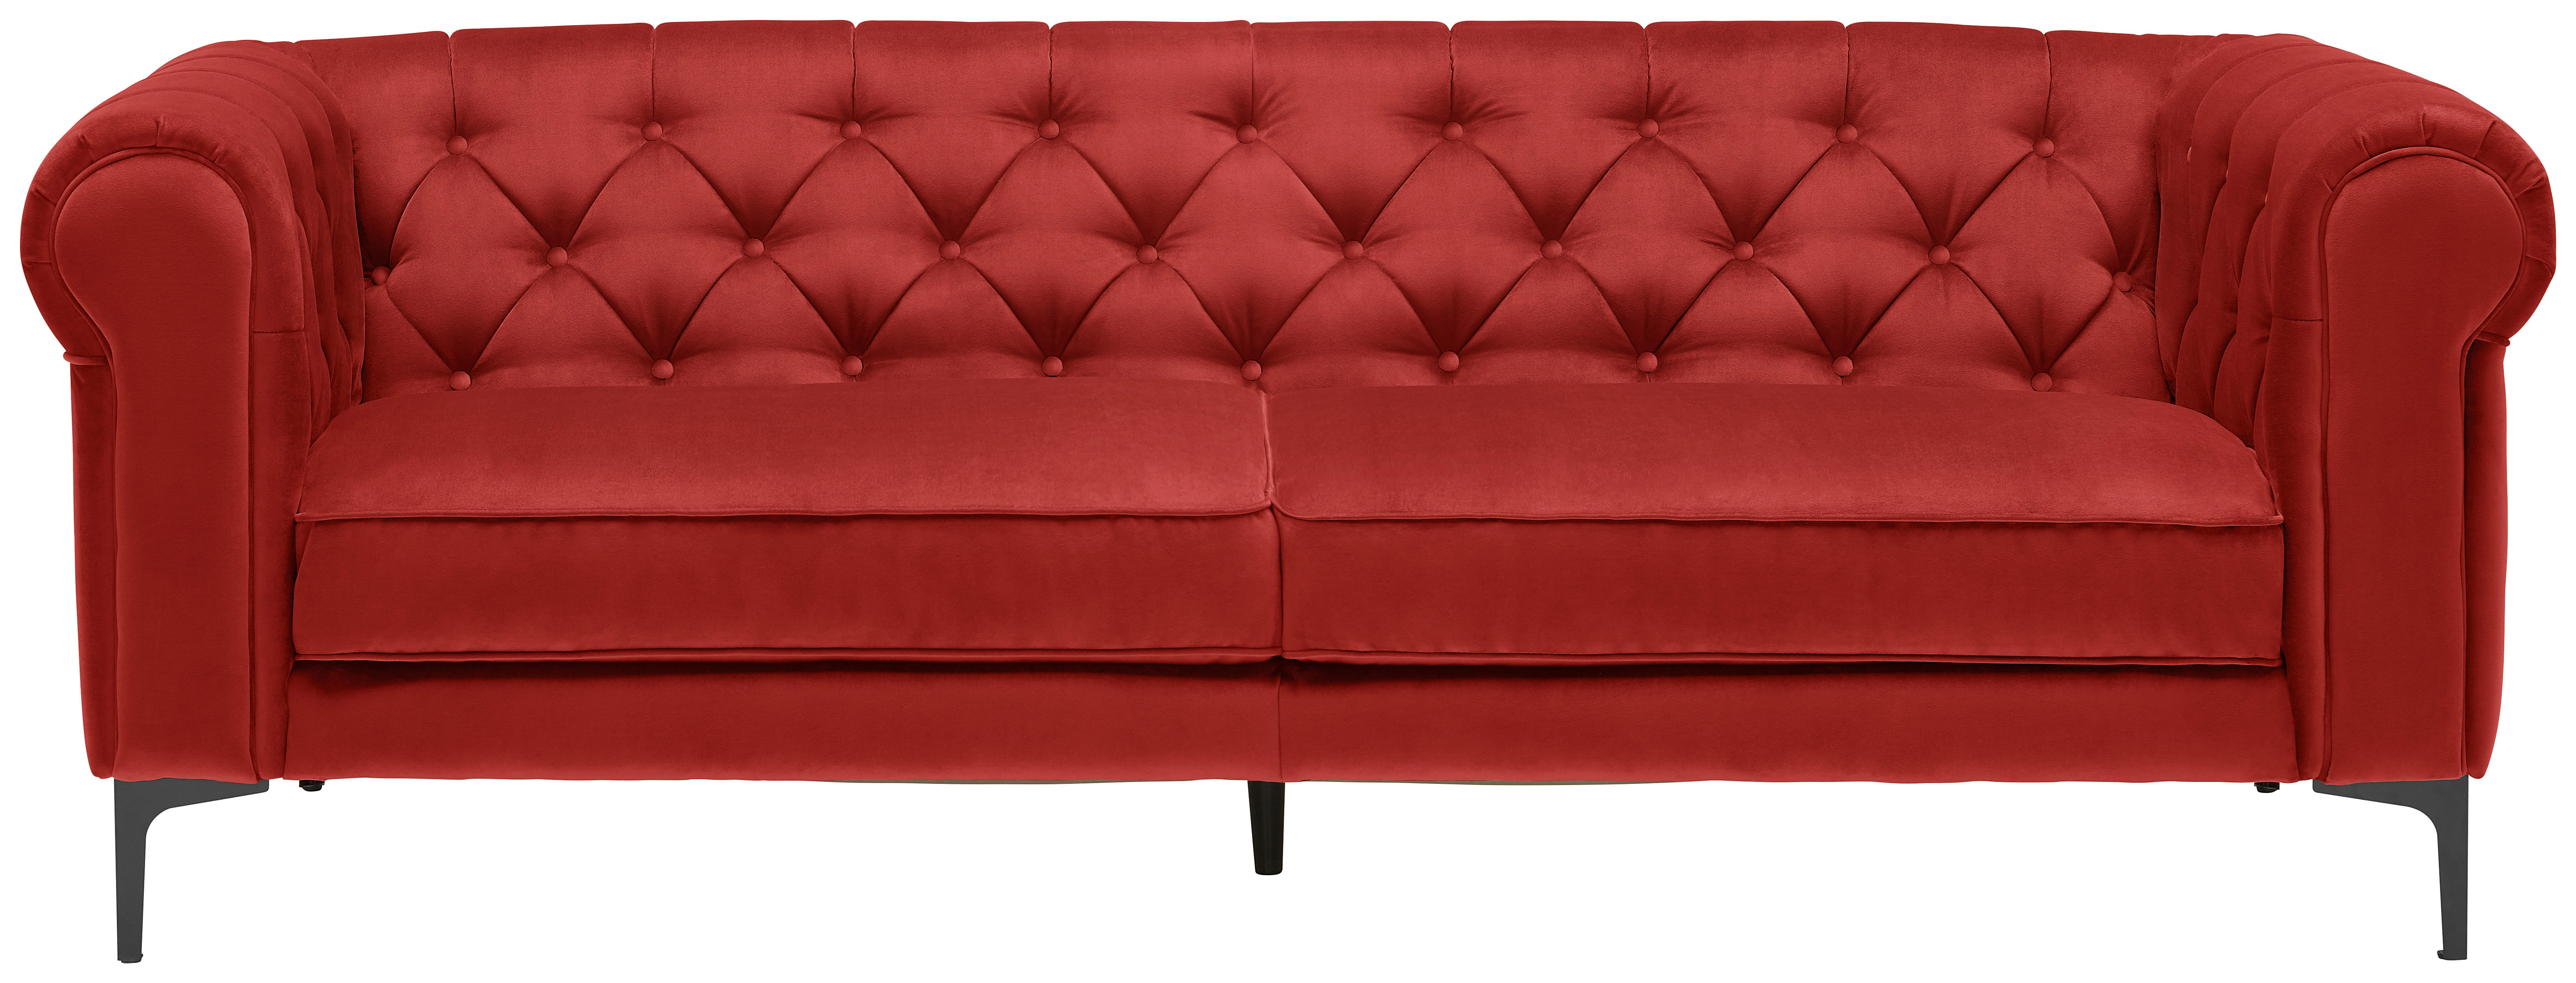 CHESTERFIELD-SOFA Rot Samt  - Rot/Schwarz, Trend, Textil/Metall (220/75/90cm) - Carryhome